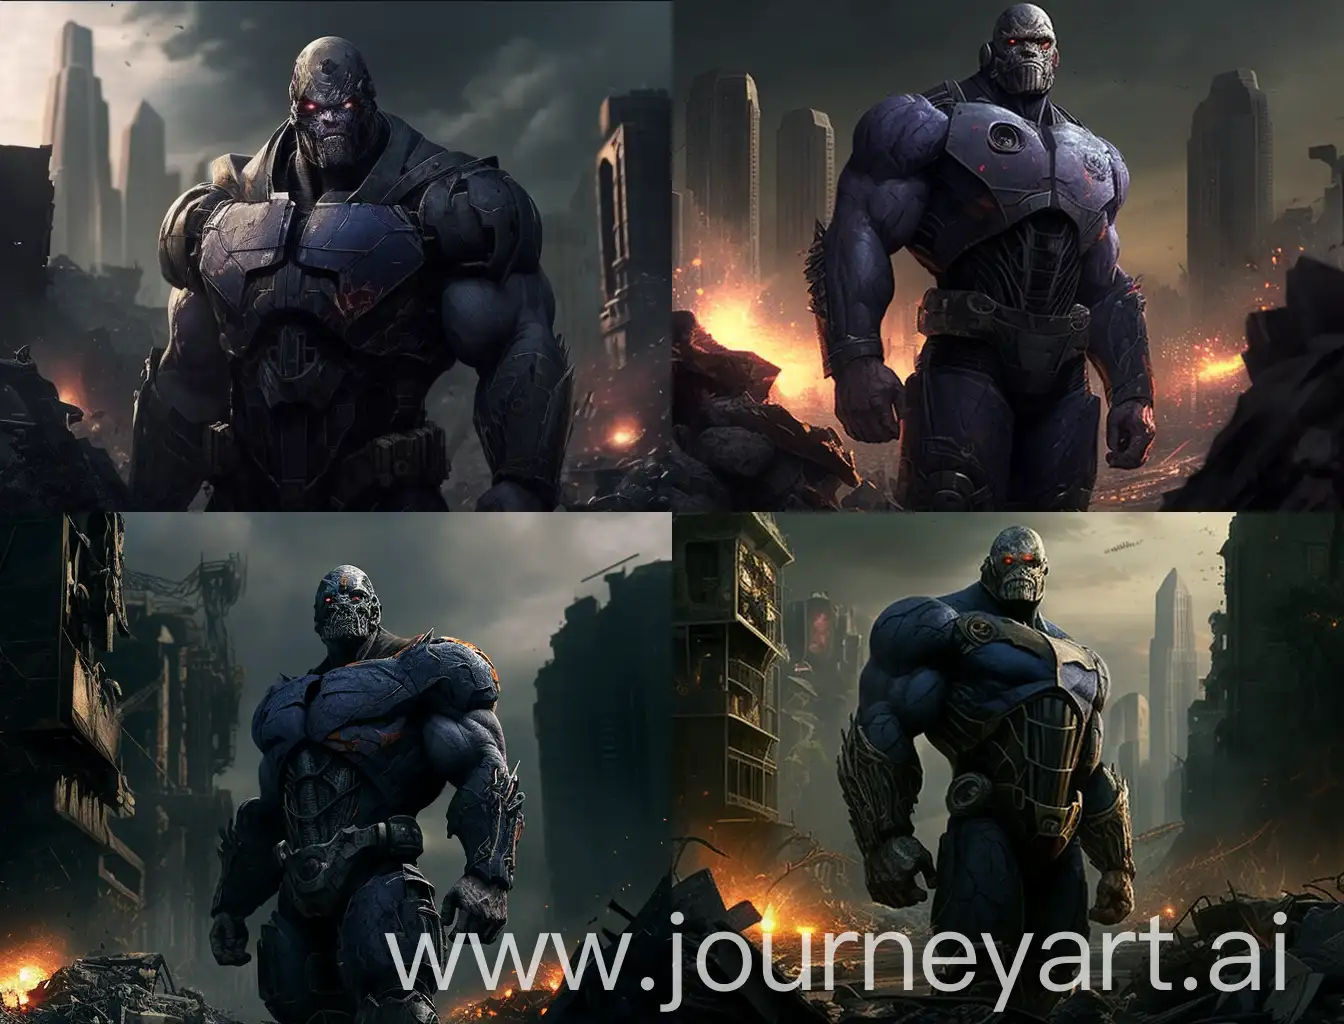 Darkseid-Stands-Amidst-Ruined-Cities-in-a-Gritty-Apocalyptic-Landscape